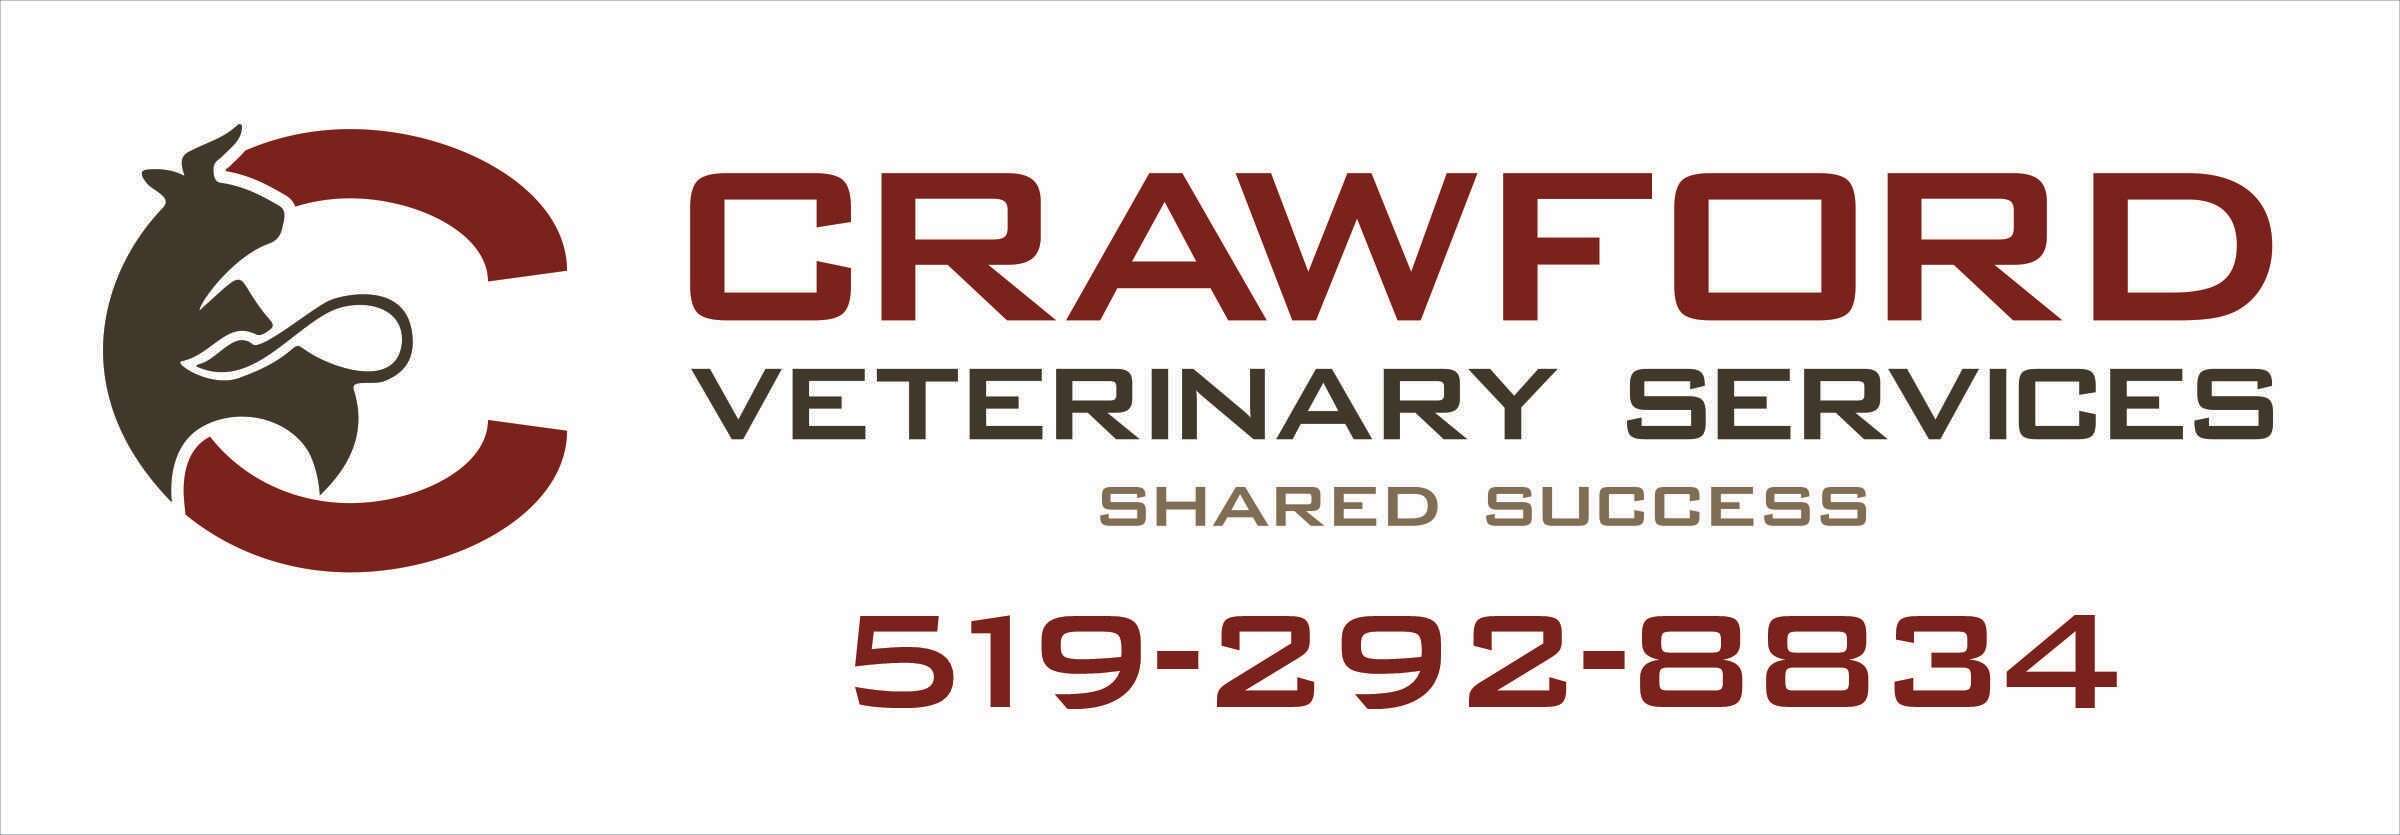 Crawford Veterinary Services